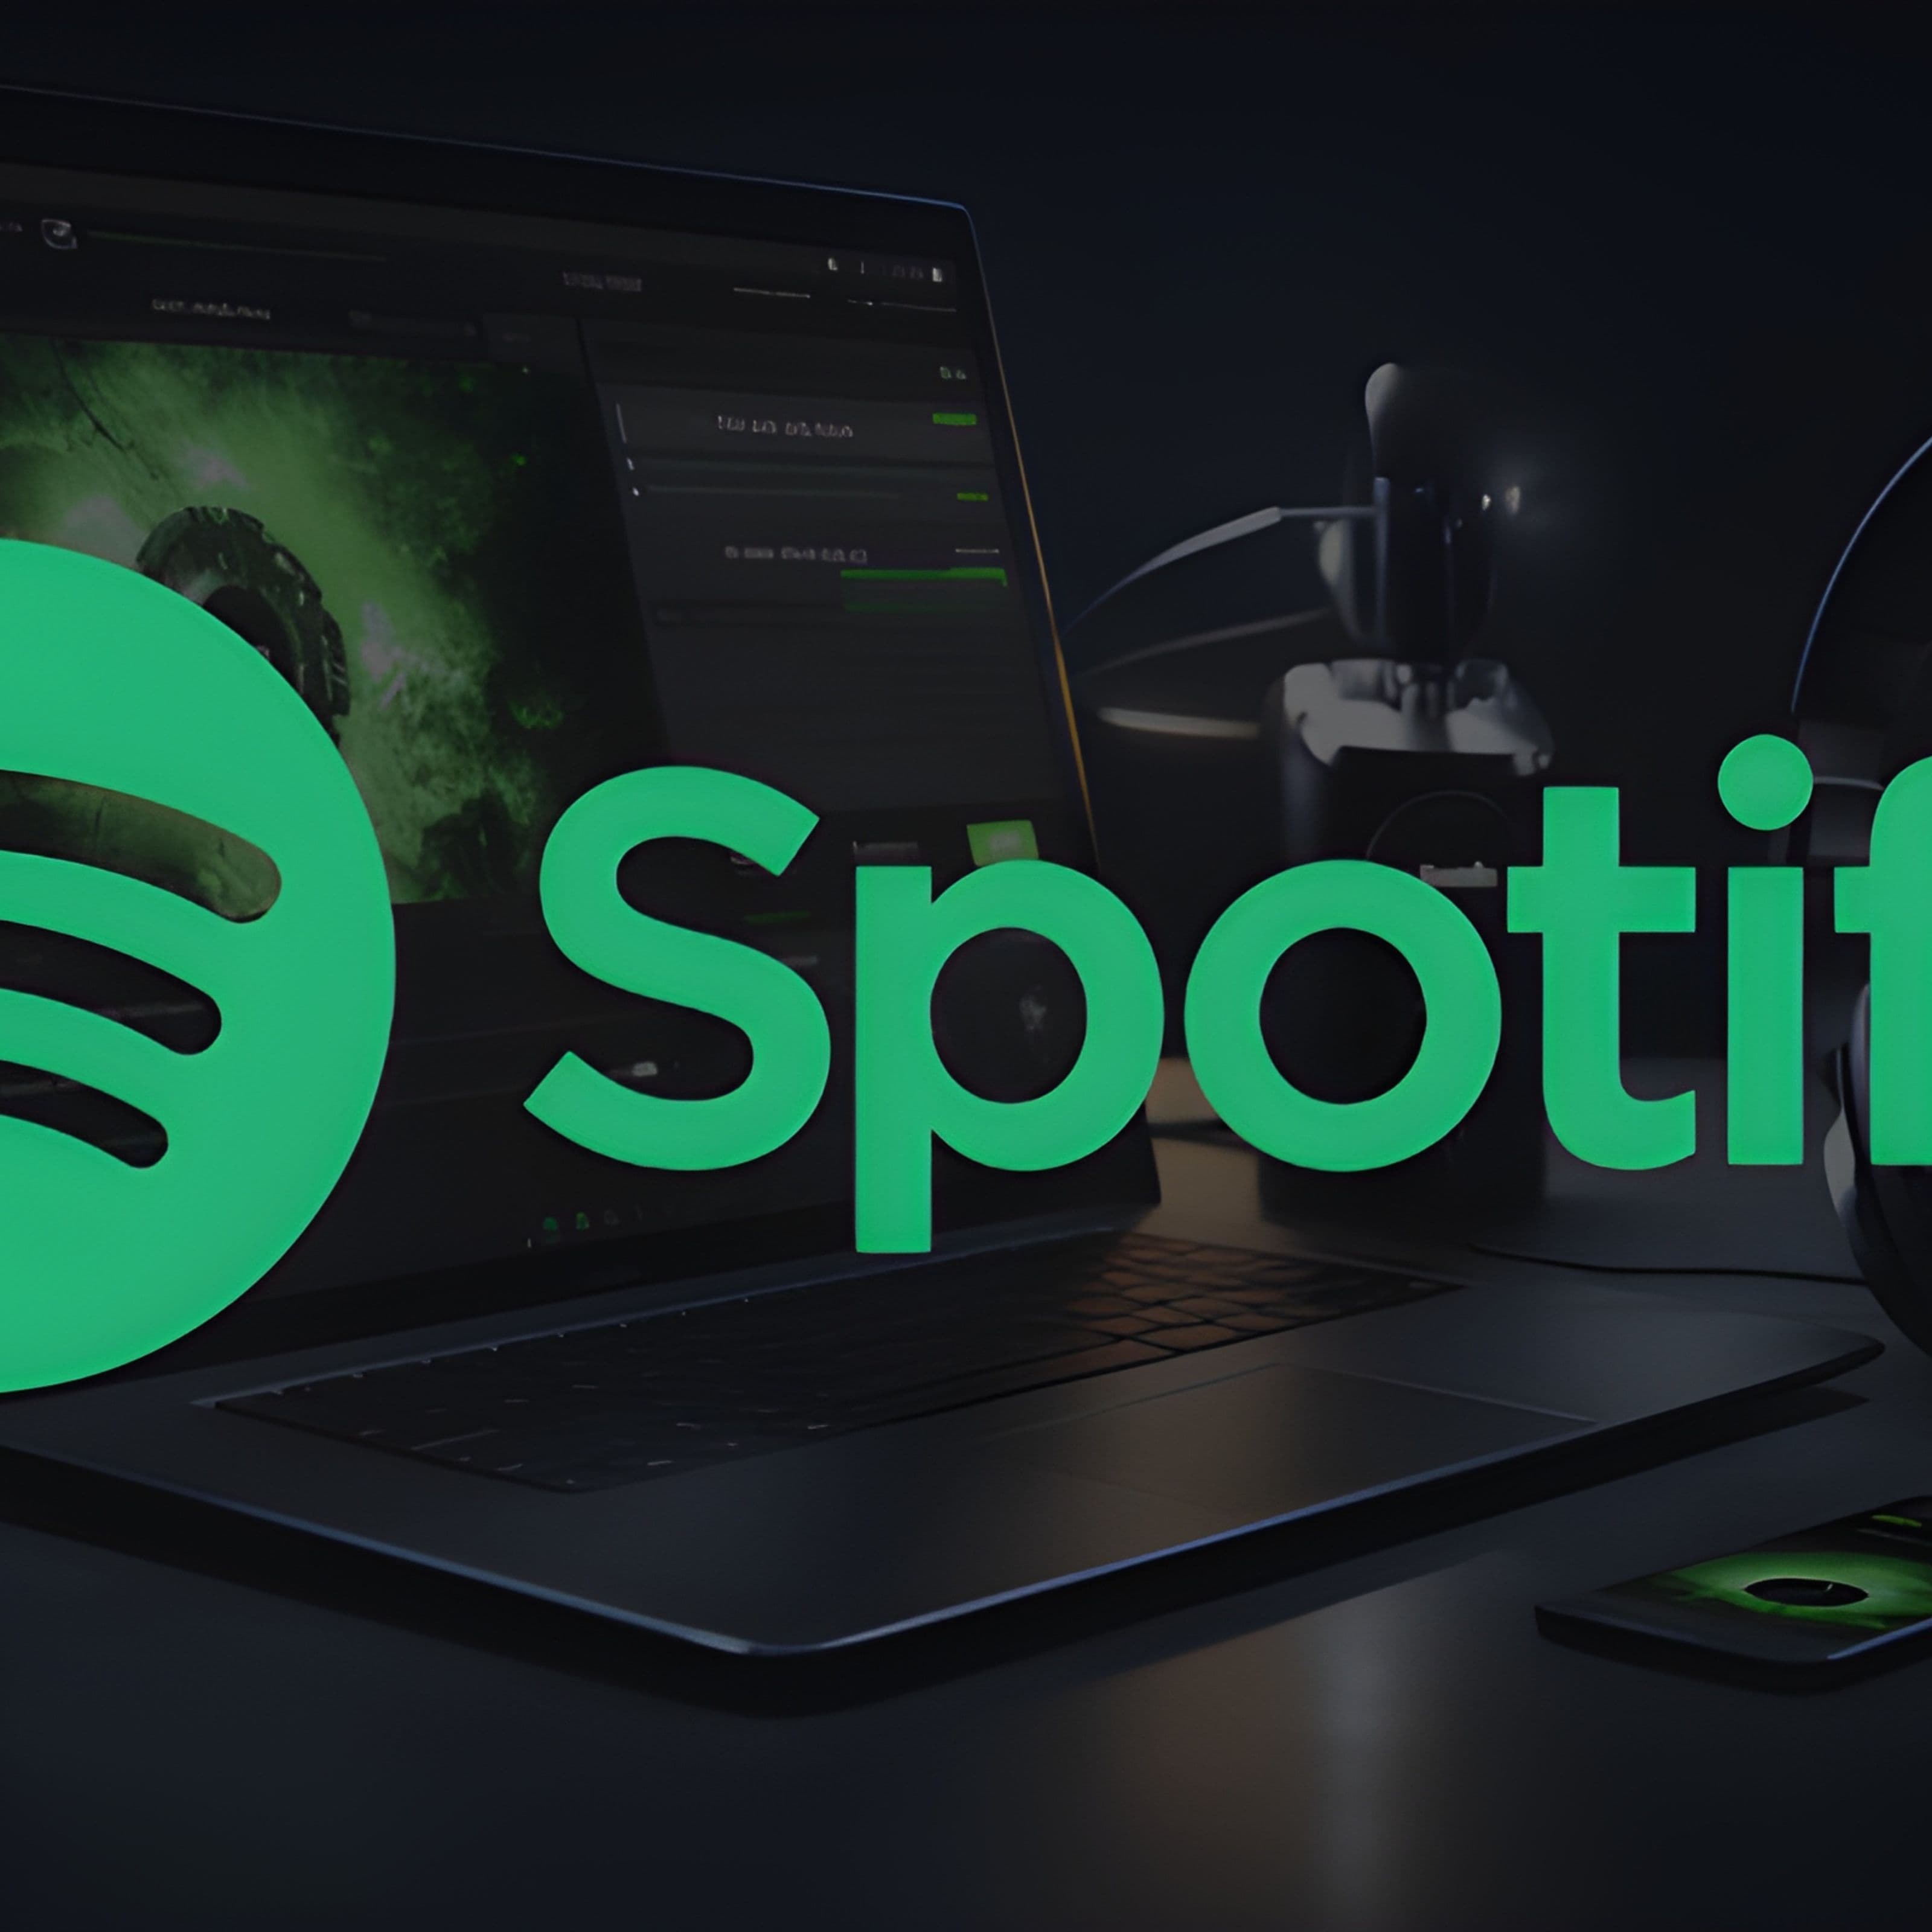 Strategies that made Spotify the #1 music streaming platform